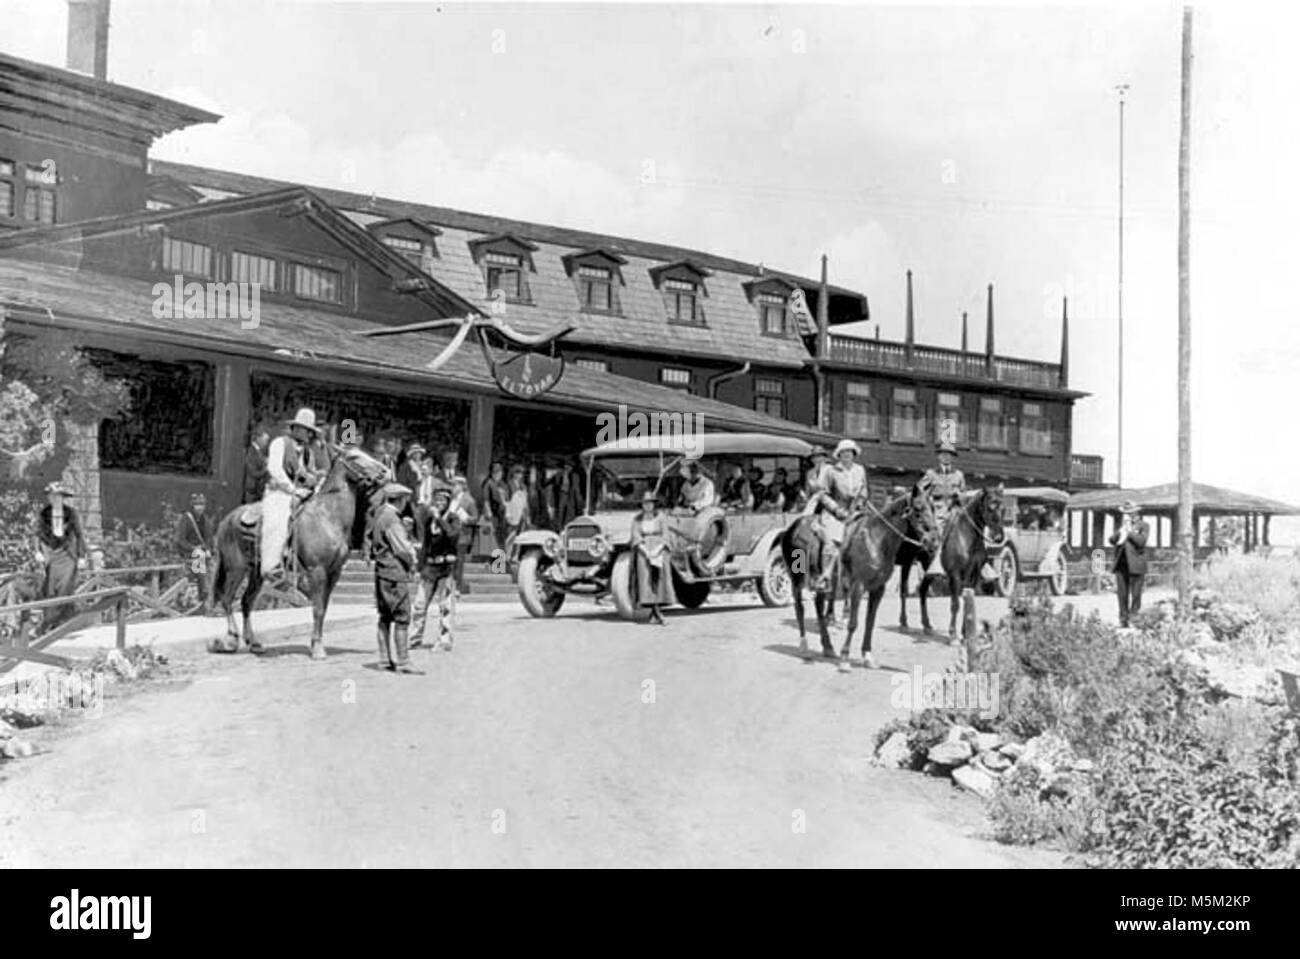 B Grand Canyon Historic El Tovar Hotel . VARIETY OF VISITORS & HORSES BY FRONT ENTRANCE TO EL TOVAR HOTEL. TOURING CARS. CIRCA 1922. FRED HARVEY Stock Photo